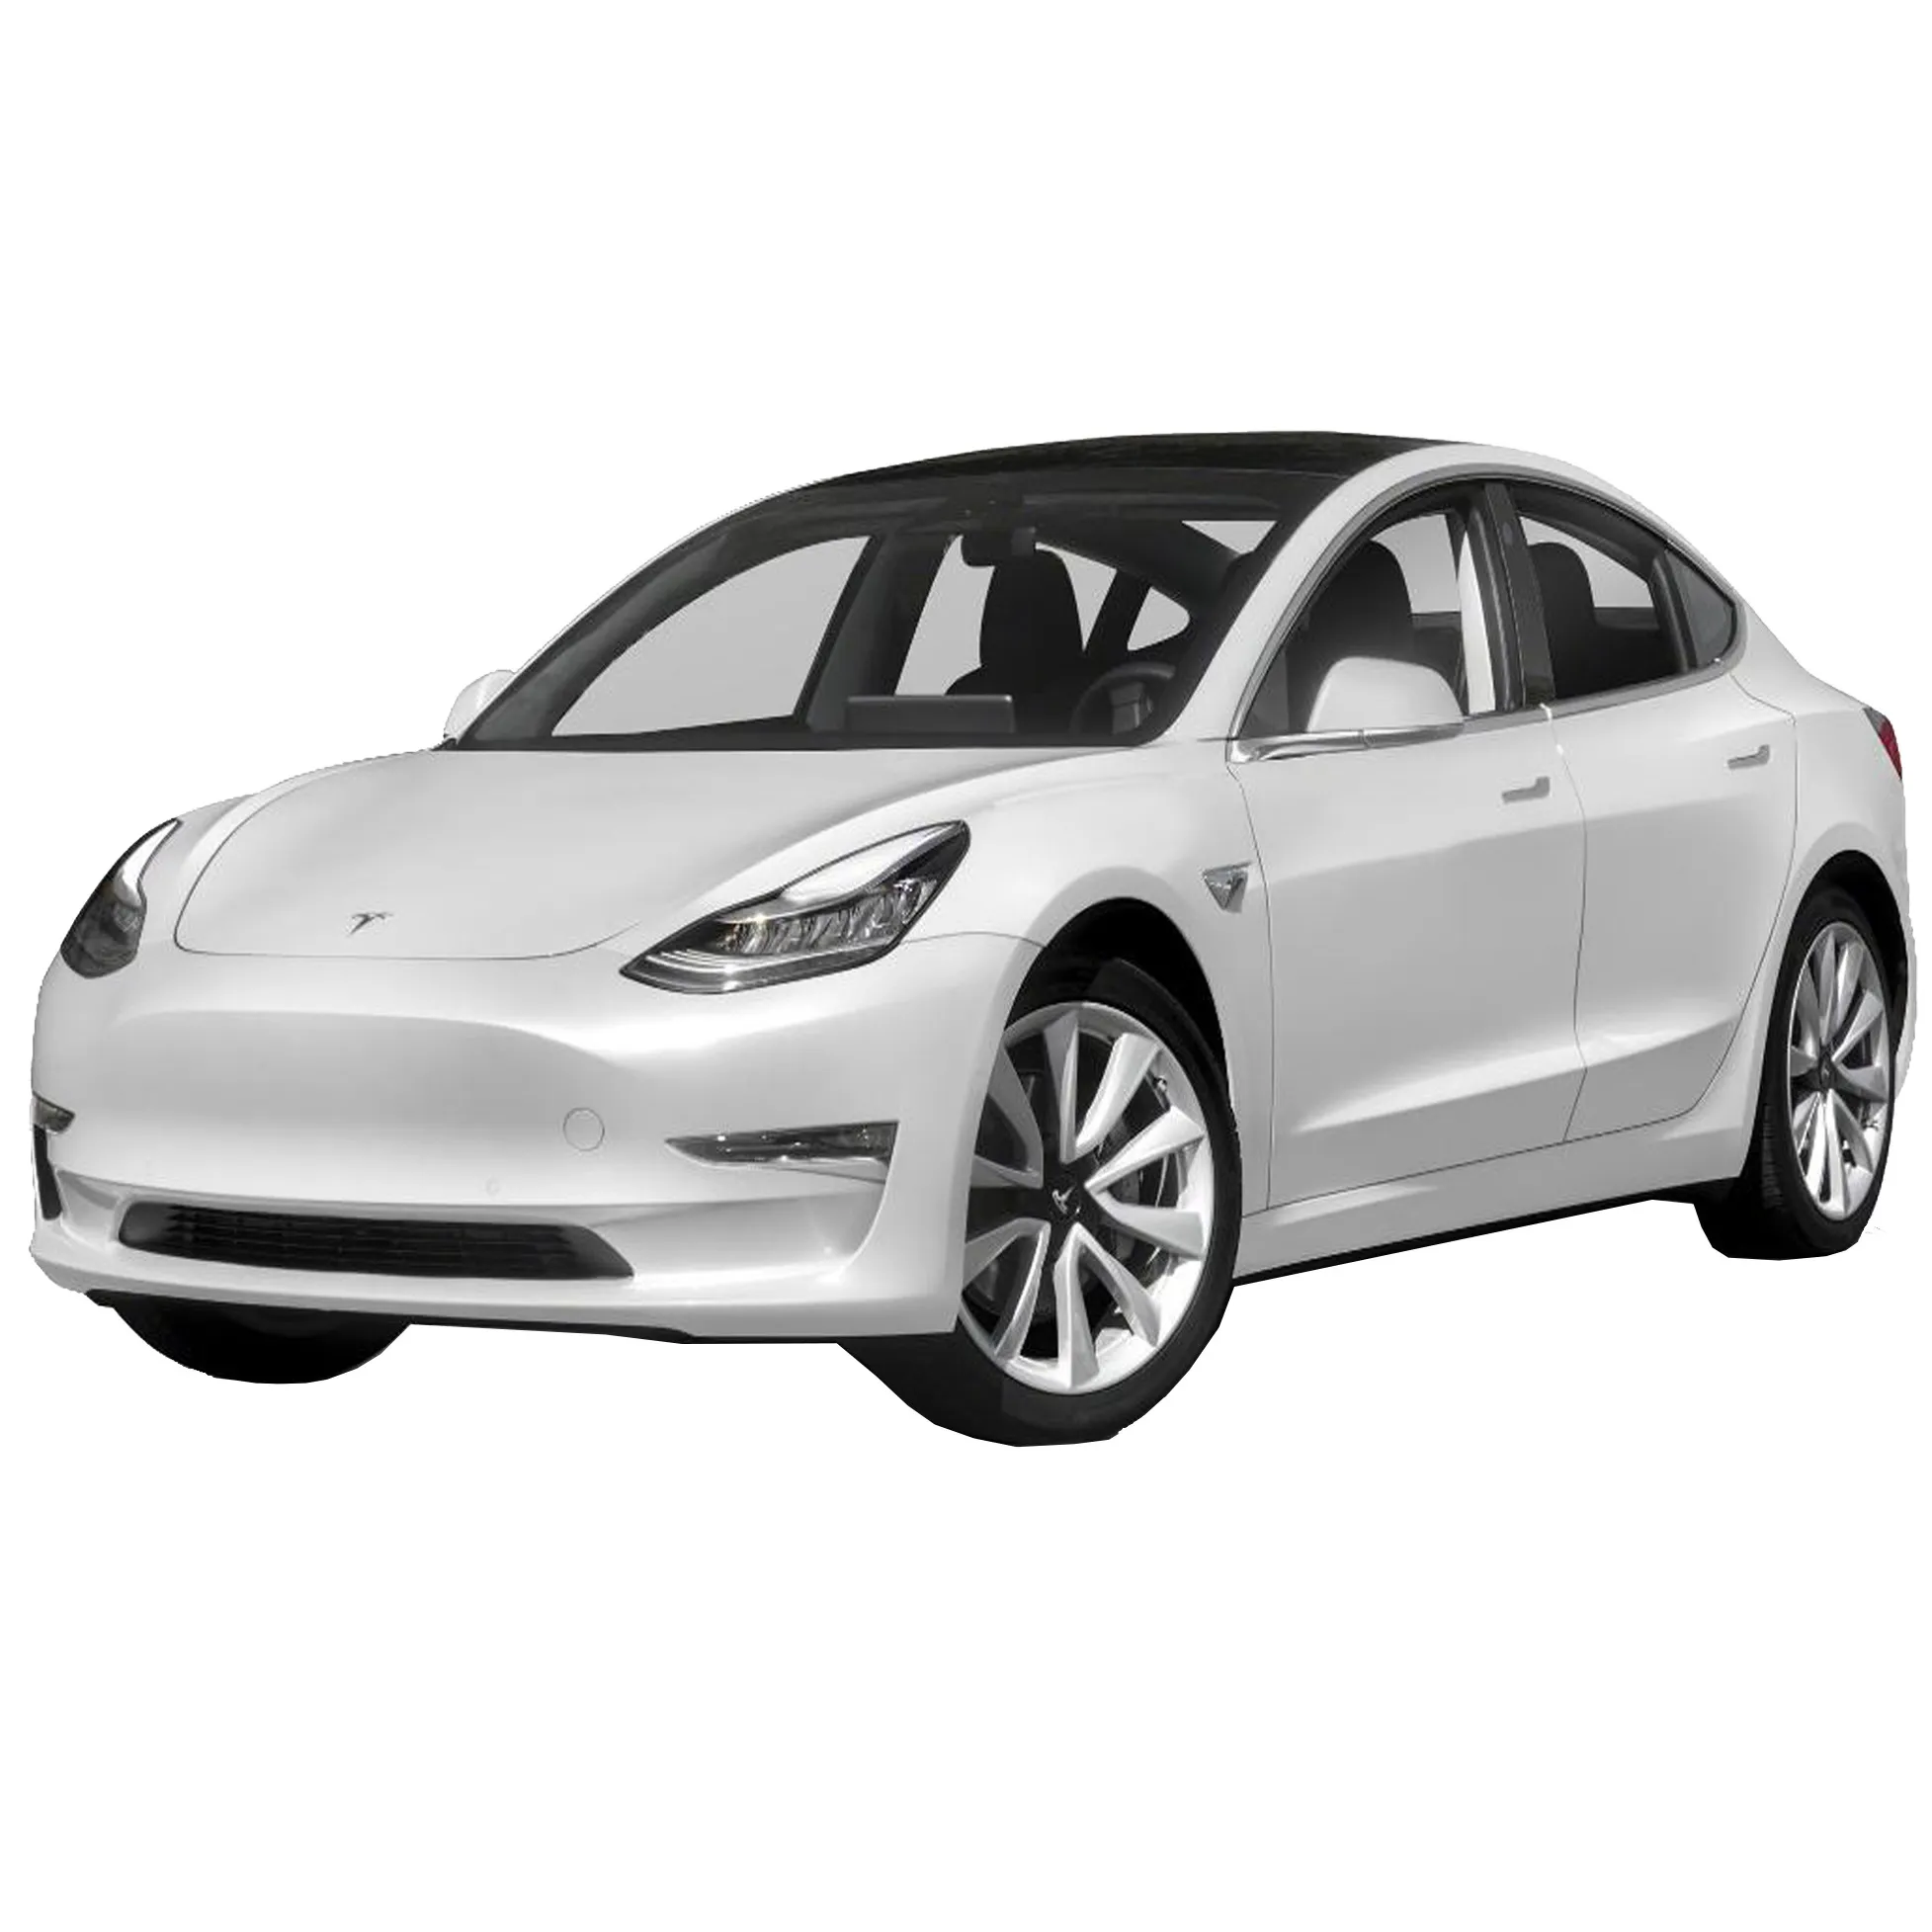 Used China model 3 sedan 4 seater white color pre-owned Tesla vehicles 4WD 275hp kit electric car for sale